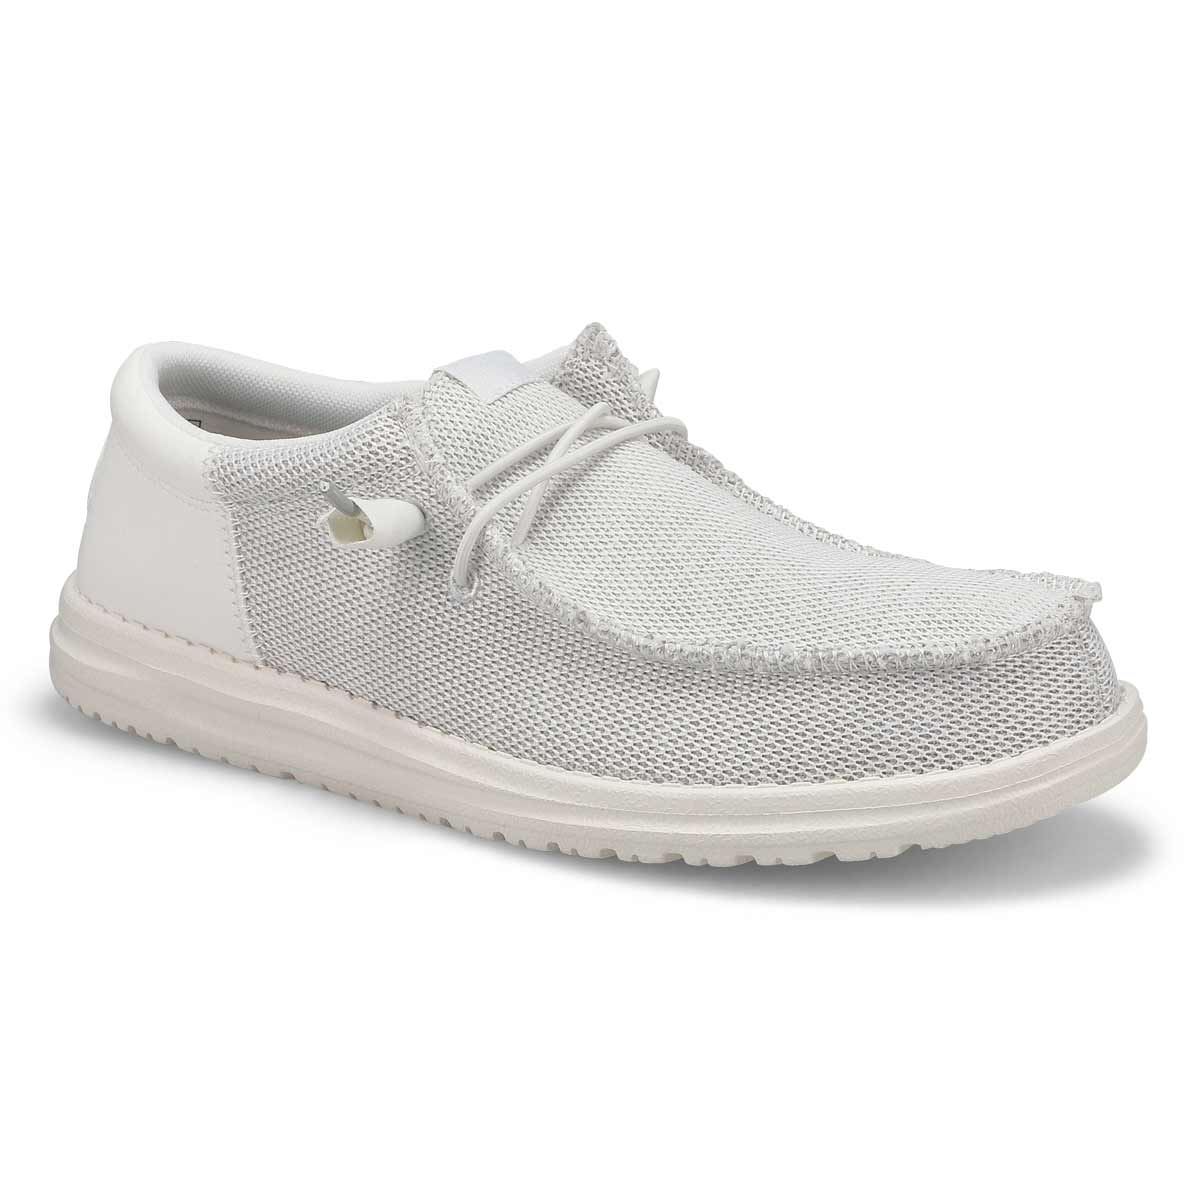 Men's Wally Funk Mono Casual Shoe - Ghosted